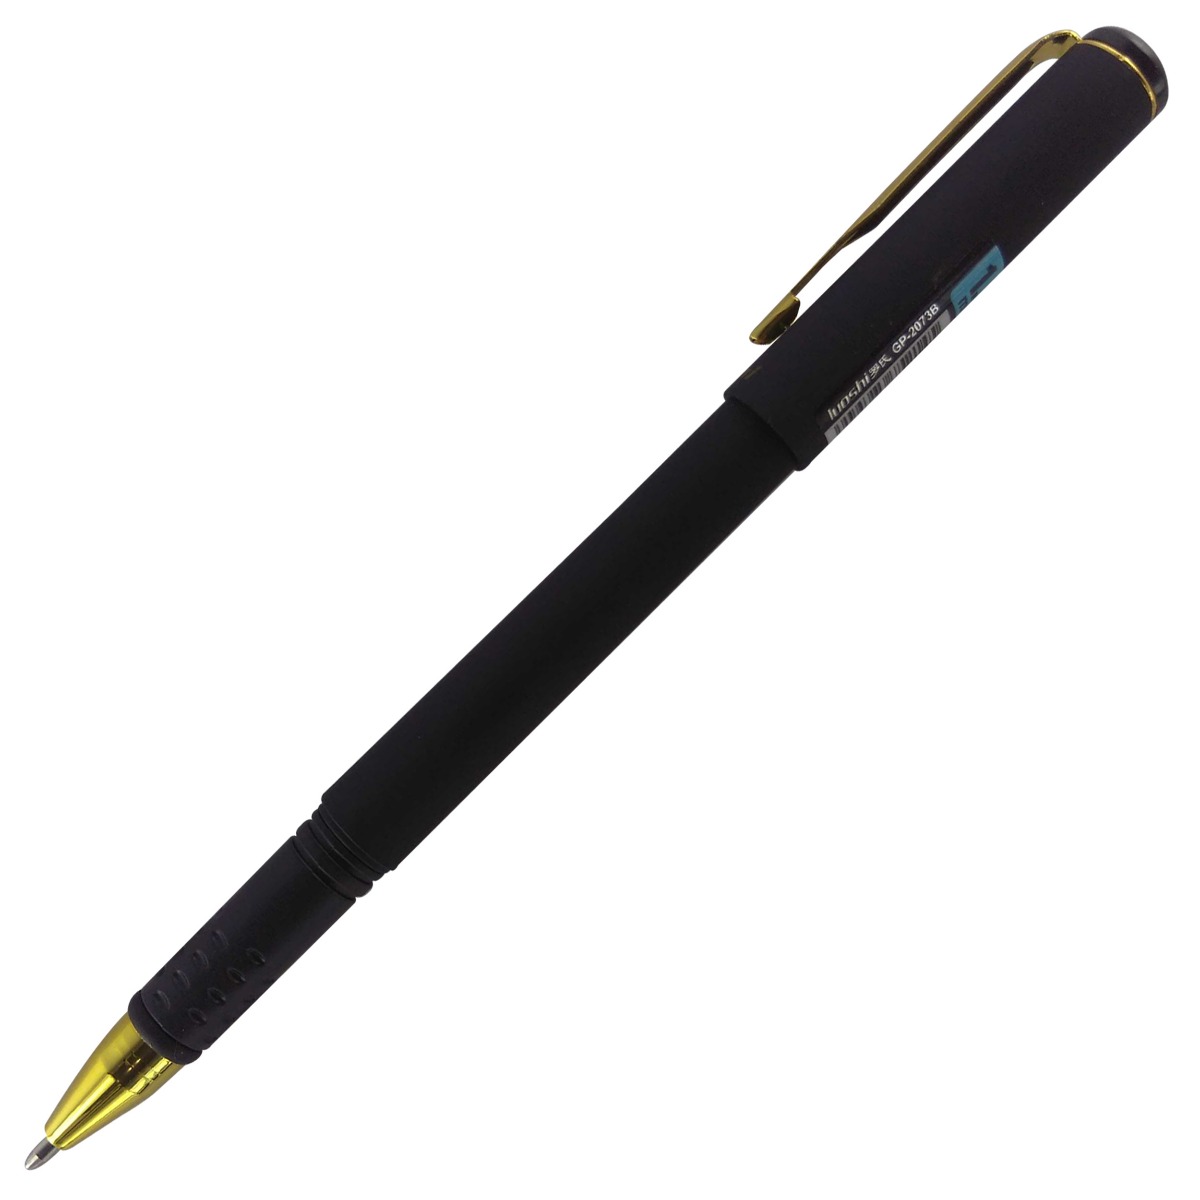 Luoshi 1.0mm Model:15699 Black Color Mat Finish Body With Blue Writing Gel Pen 